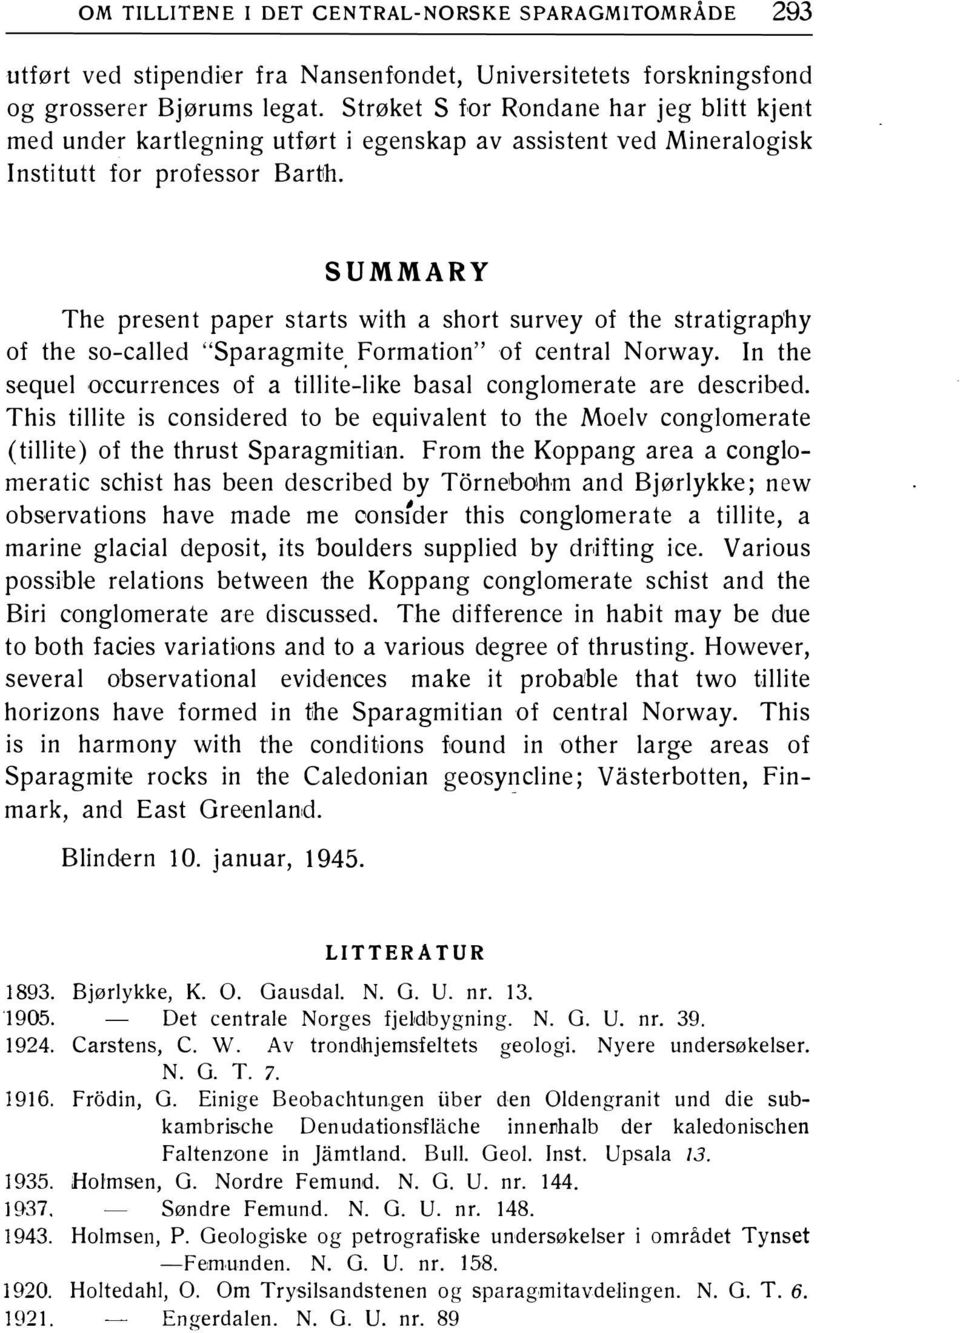 SUMMA RY The present paper starts with a short survey of the stratigrap'hy of the so-called "Sparagmite Formation" of central Norway. In the.